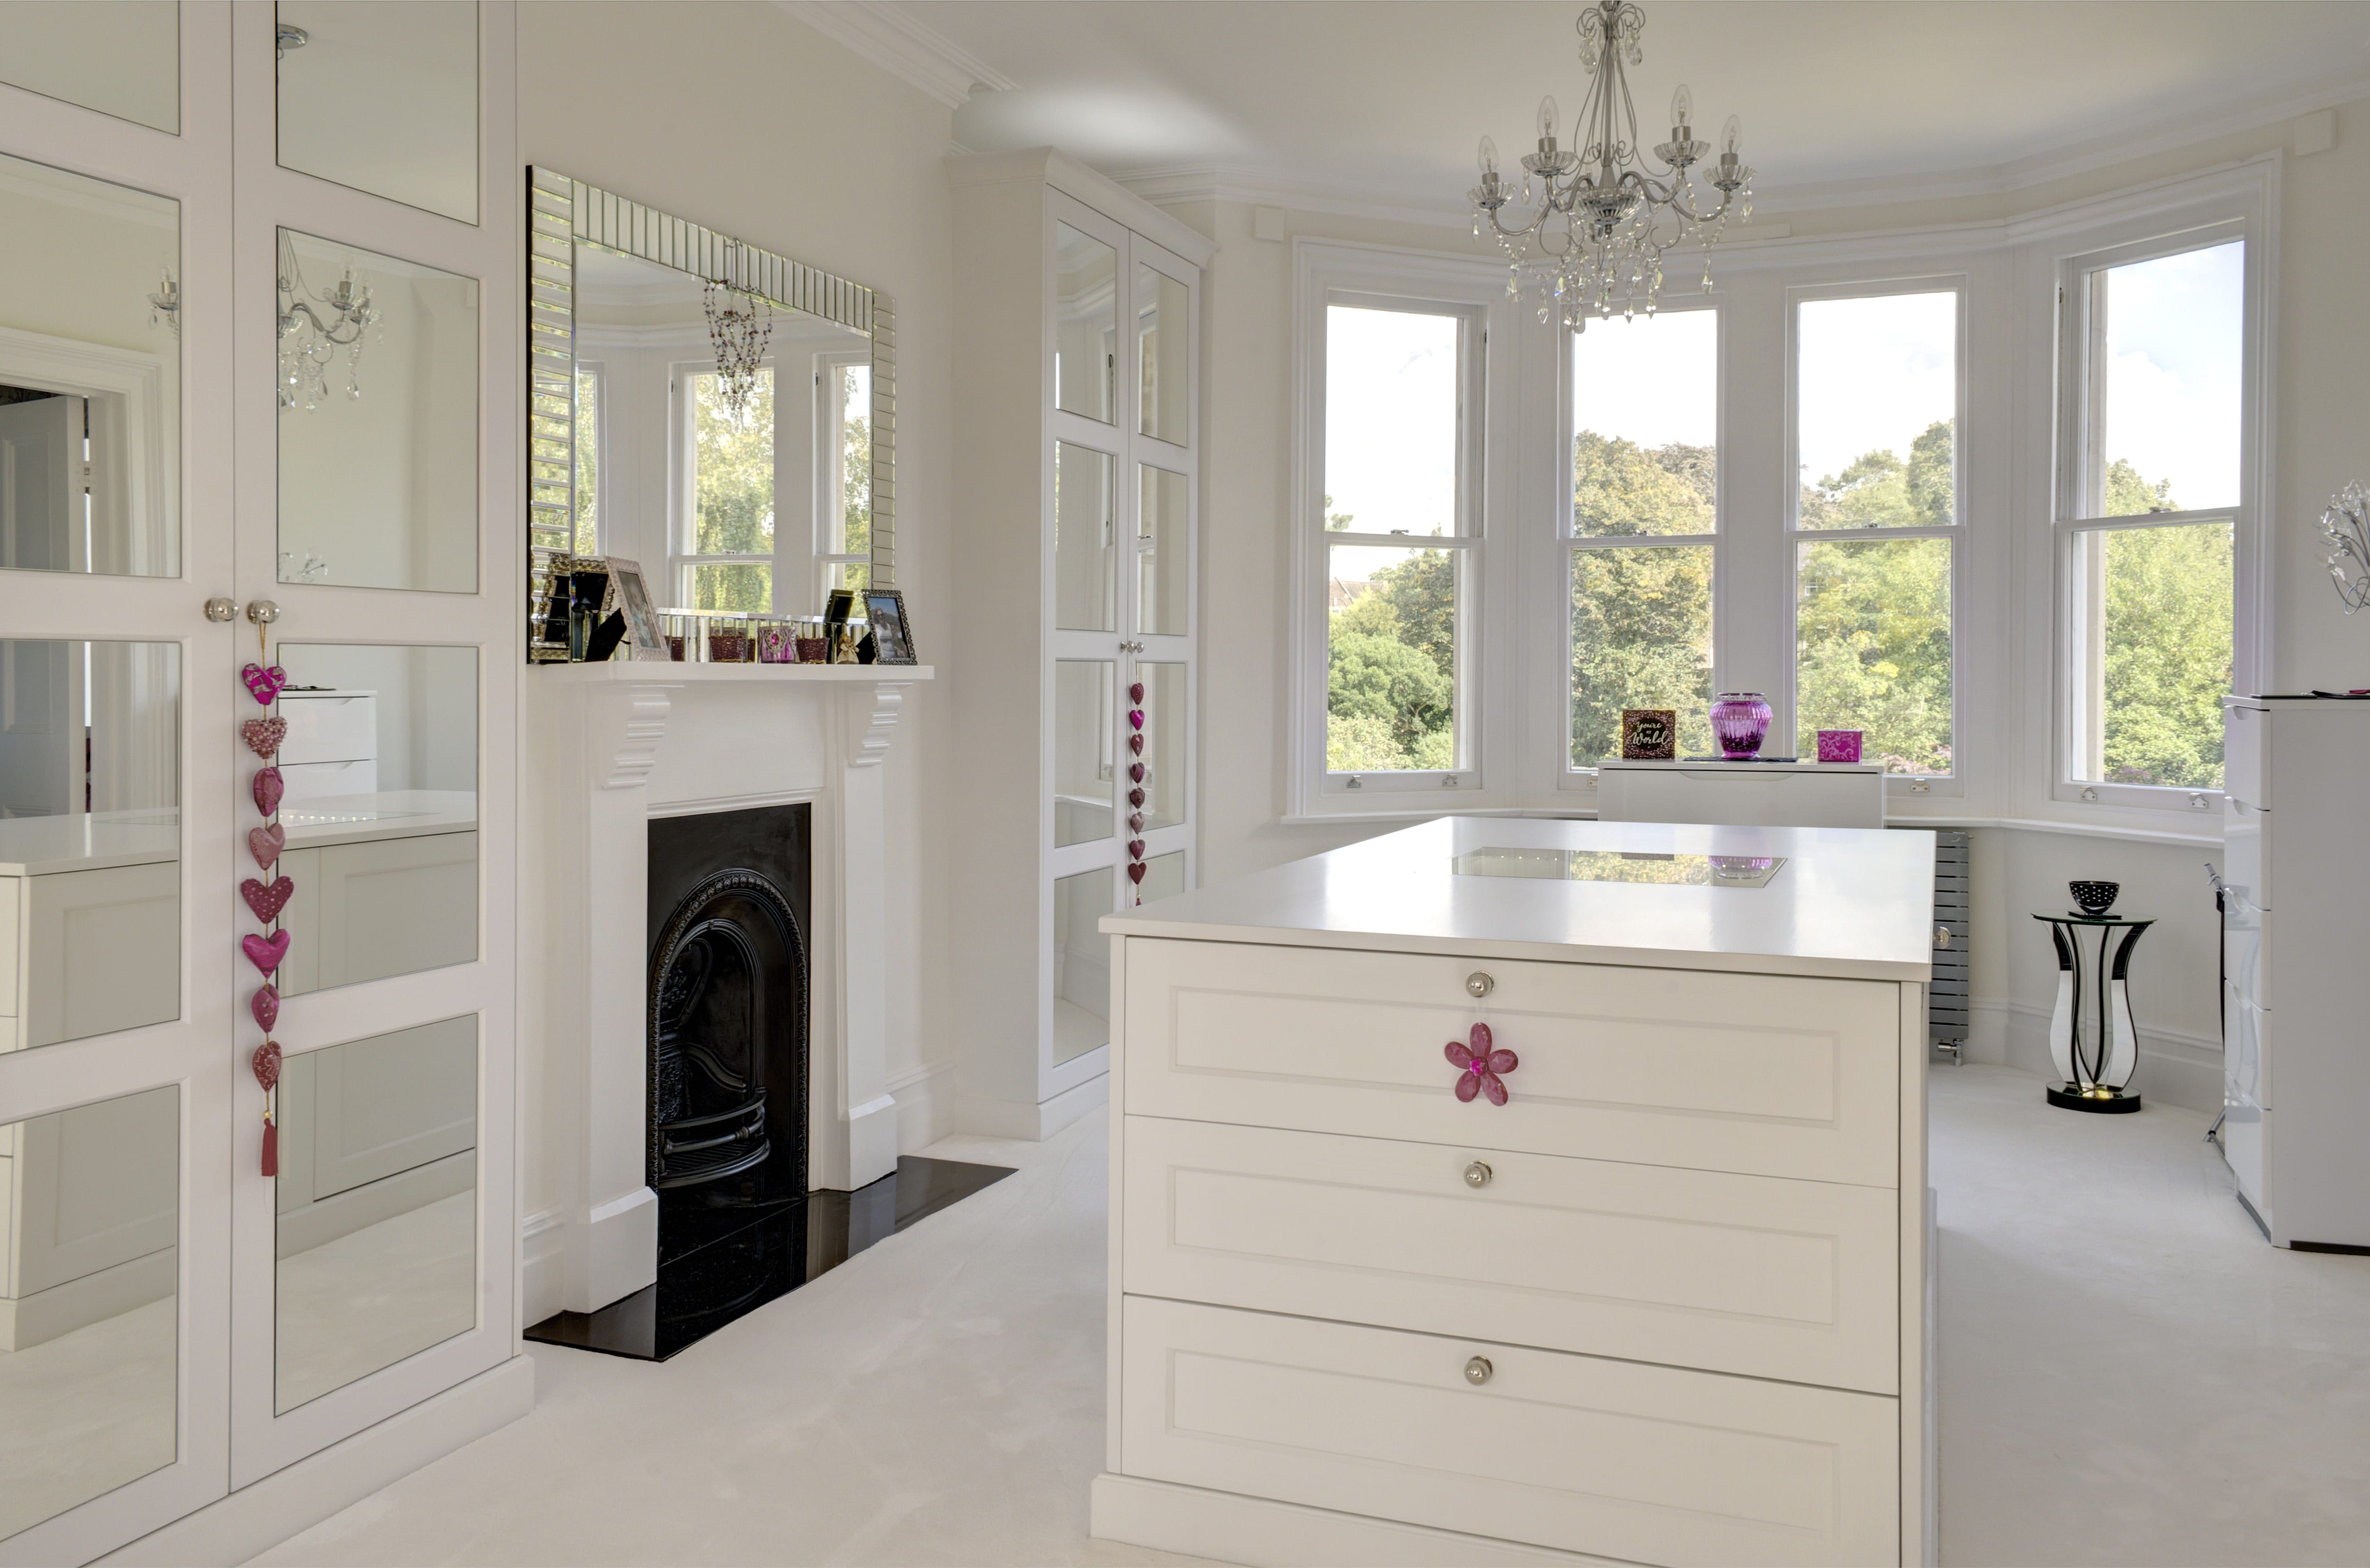 A white, bespoke dressing room, with large drawer set/worktop in the centre. Pink hanging decorations provide a contrasting colour.